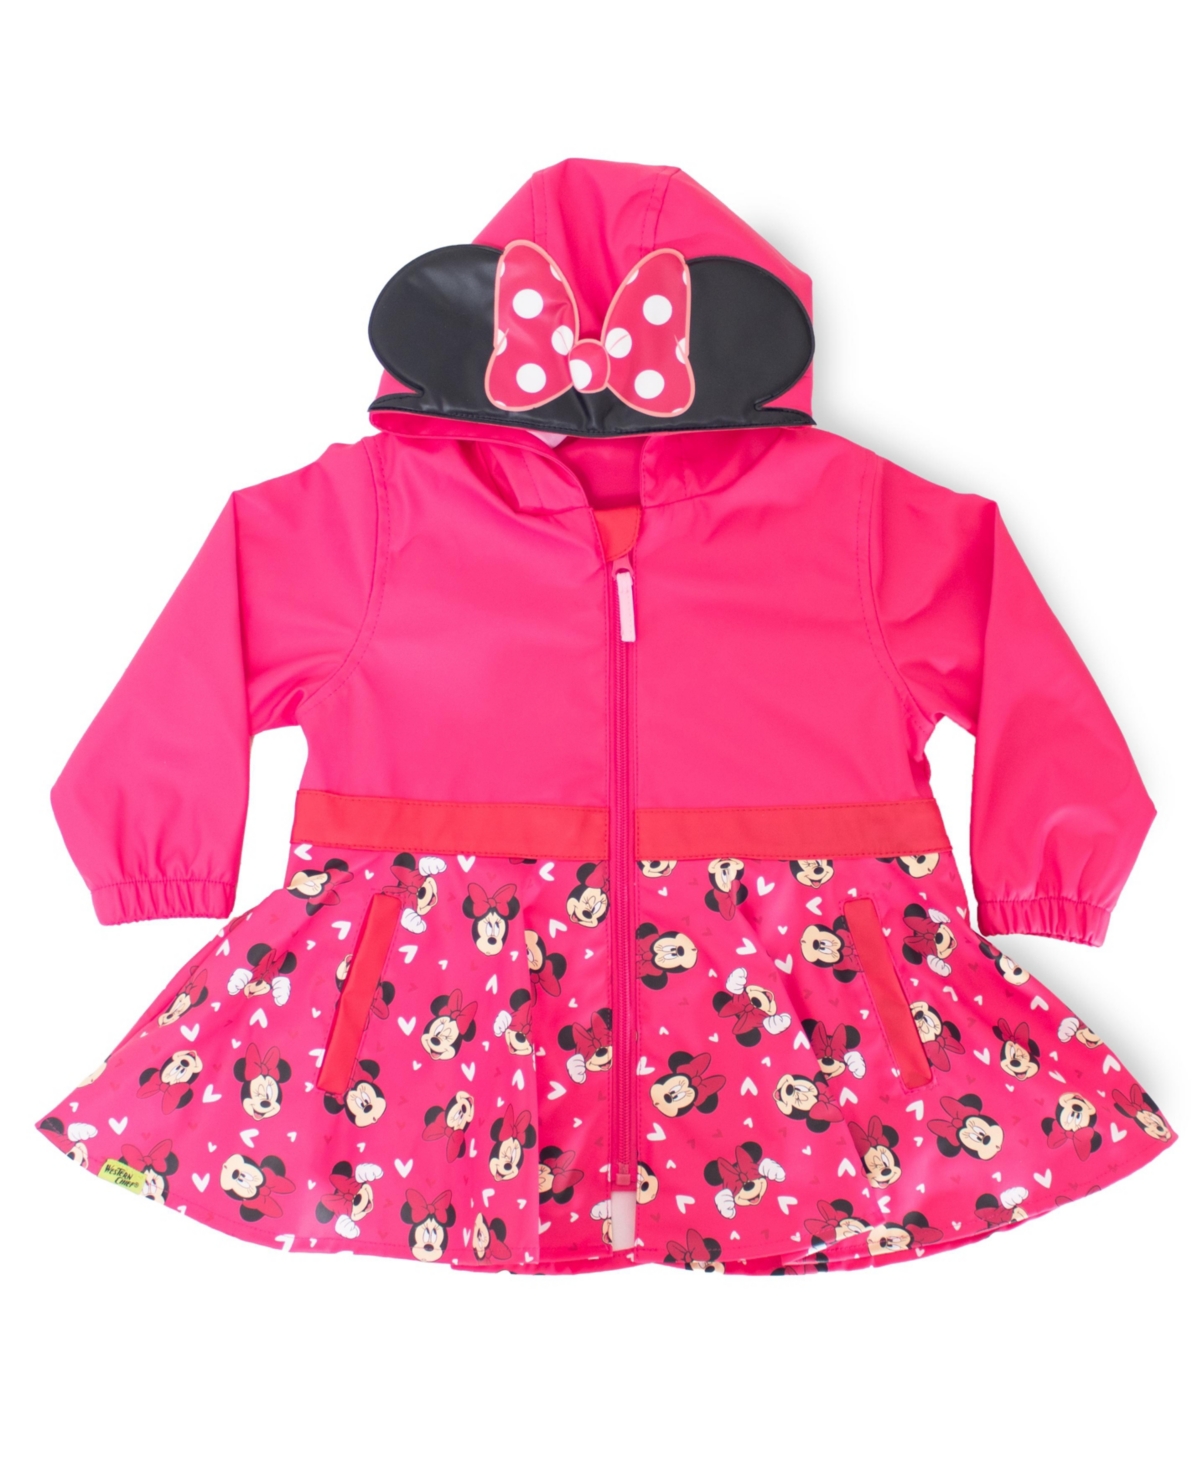 WESTERN CHIEF LITTLE GIRL'S AND BIG GIRL'S MINNIE MOUSE RAIN COAT